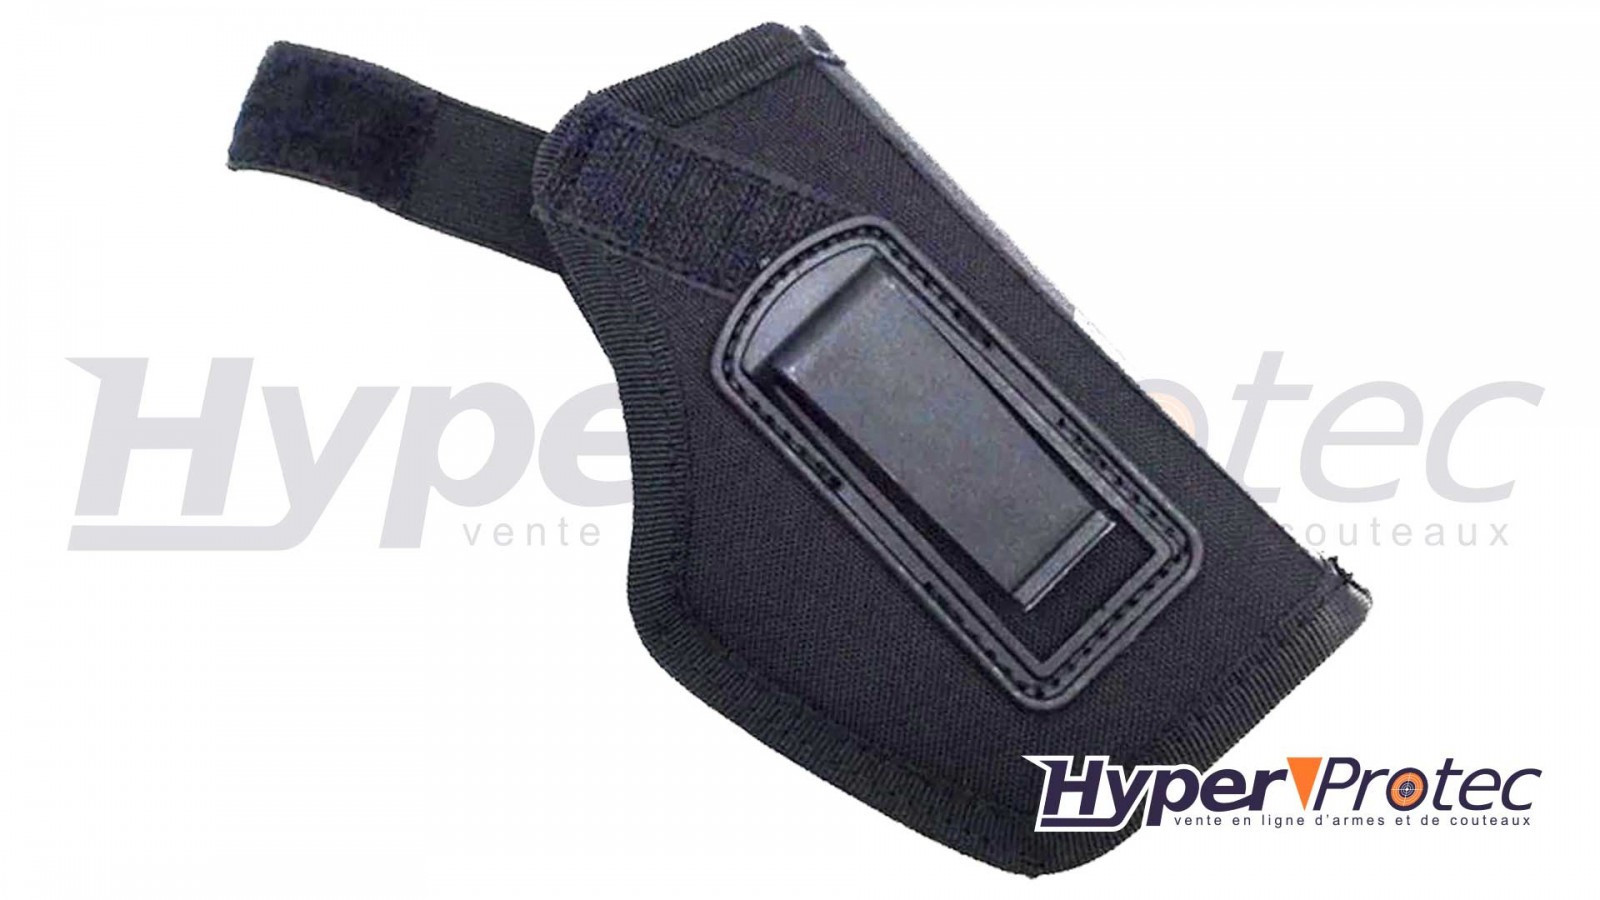 Holster port discret universel pistolet taille moyenne - Achat